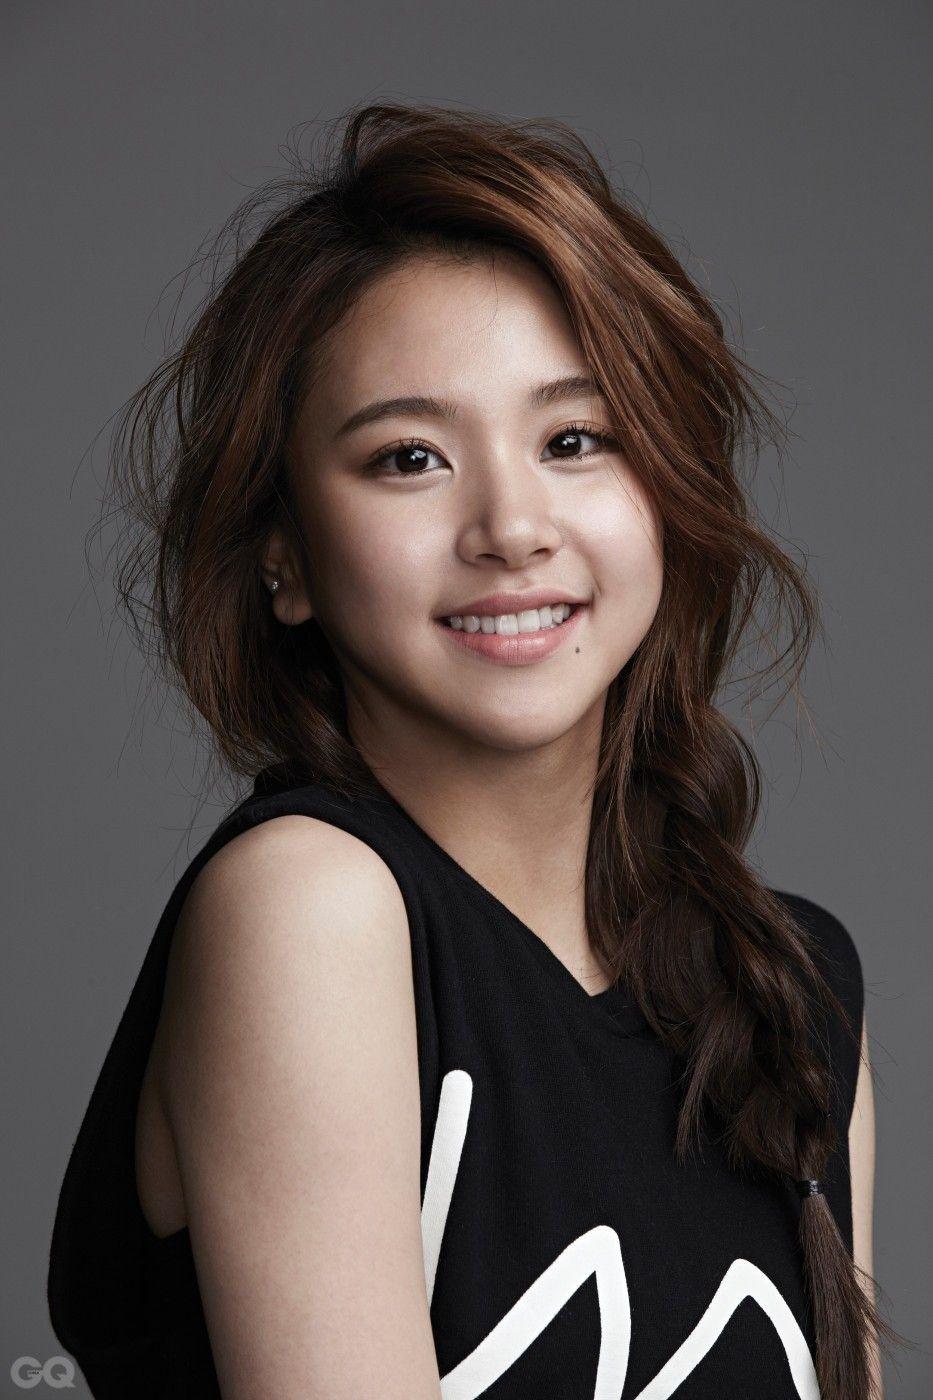 Chaeyoung (TWICE) image Chaeyoung HD wallpaper and background